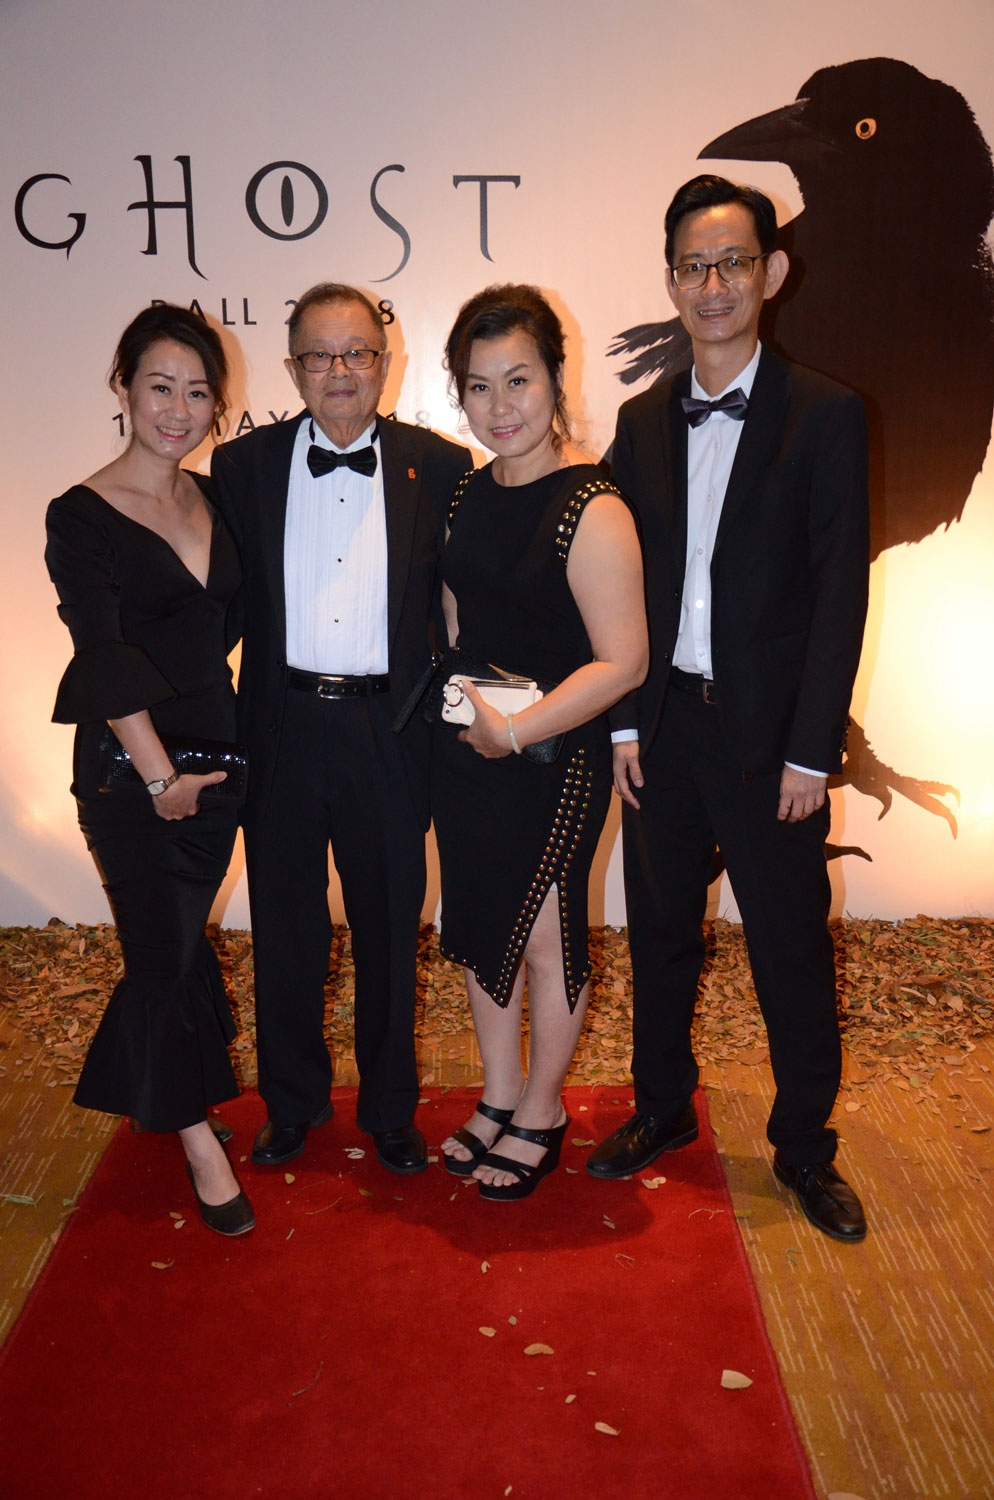  From Left: Ms Priscilla Chen, Mr Phuah Choon Meng, Ms Chen Bee Kheng and Mr Ken Phuah.